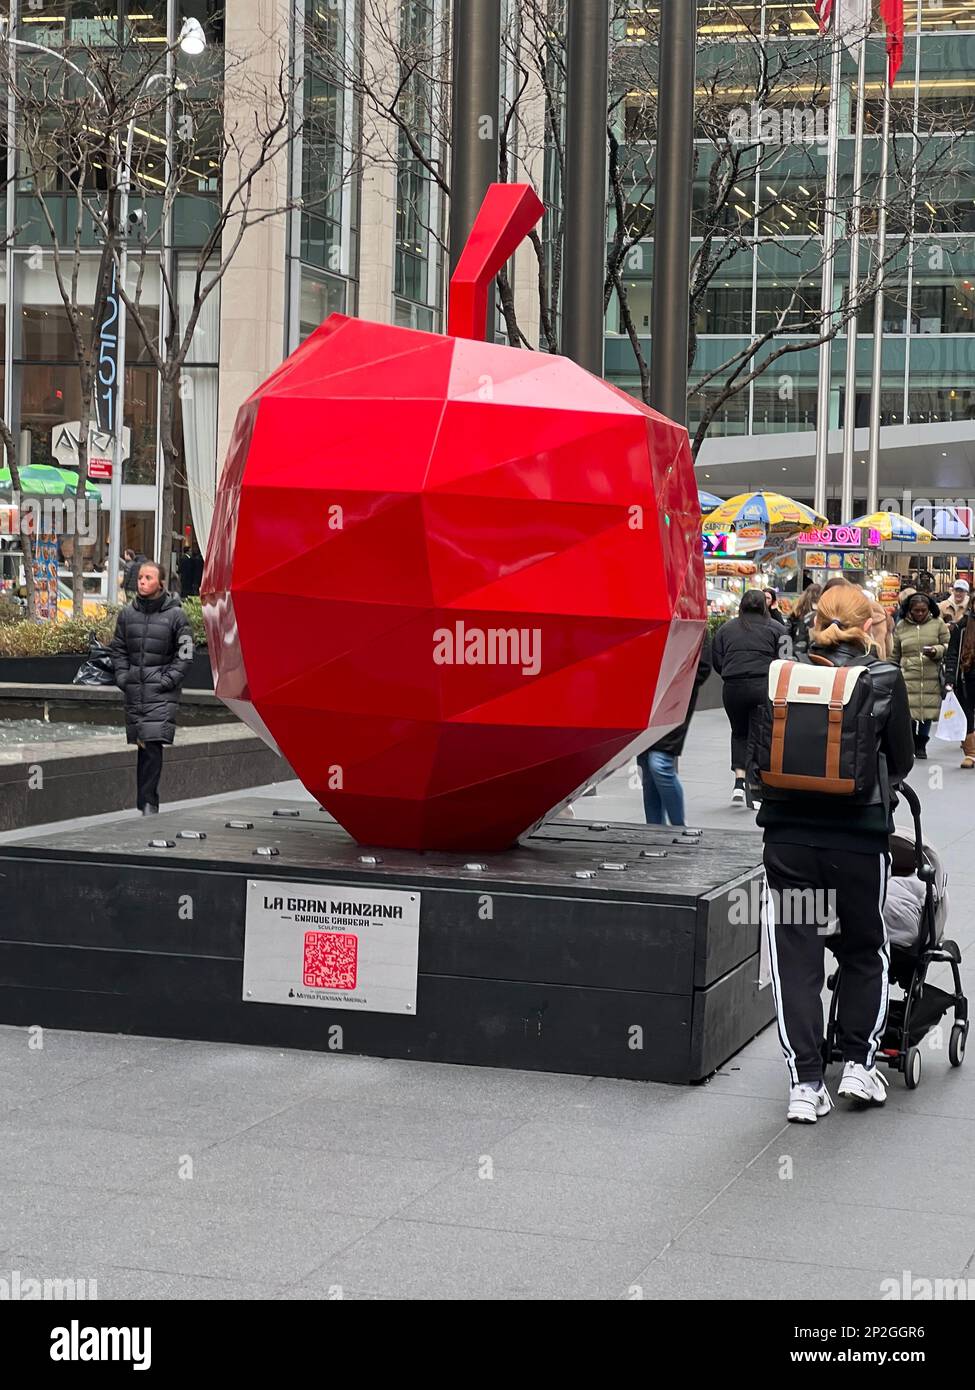 "La Gran Manzana” by Enrique Cabrera  sculptor. La Gran Manzana “The Big Apple” is the first and unique project created in homage to the city by international artist Enrique Cabrera in collaboration with Mitsui Fudosan America Inc., one of the most important real estate developers in the country and the major in Japan. Stock Photo